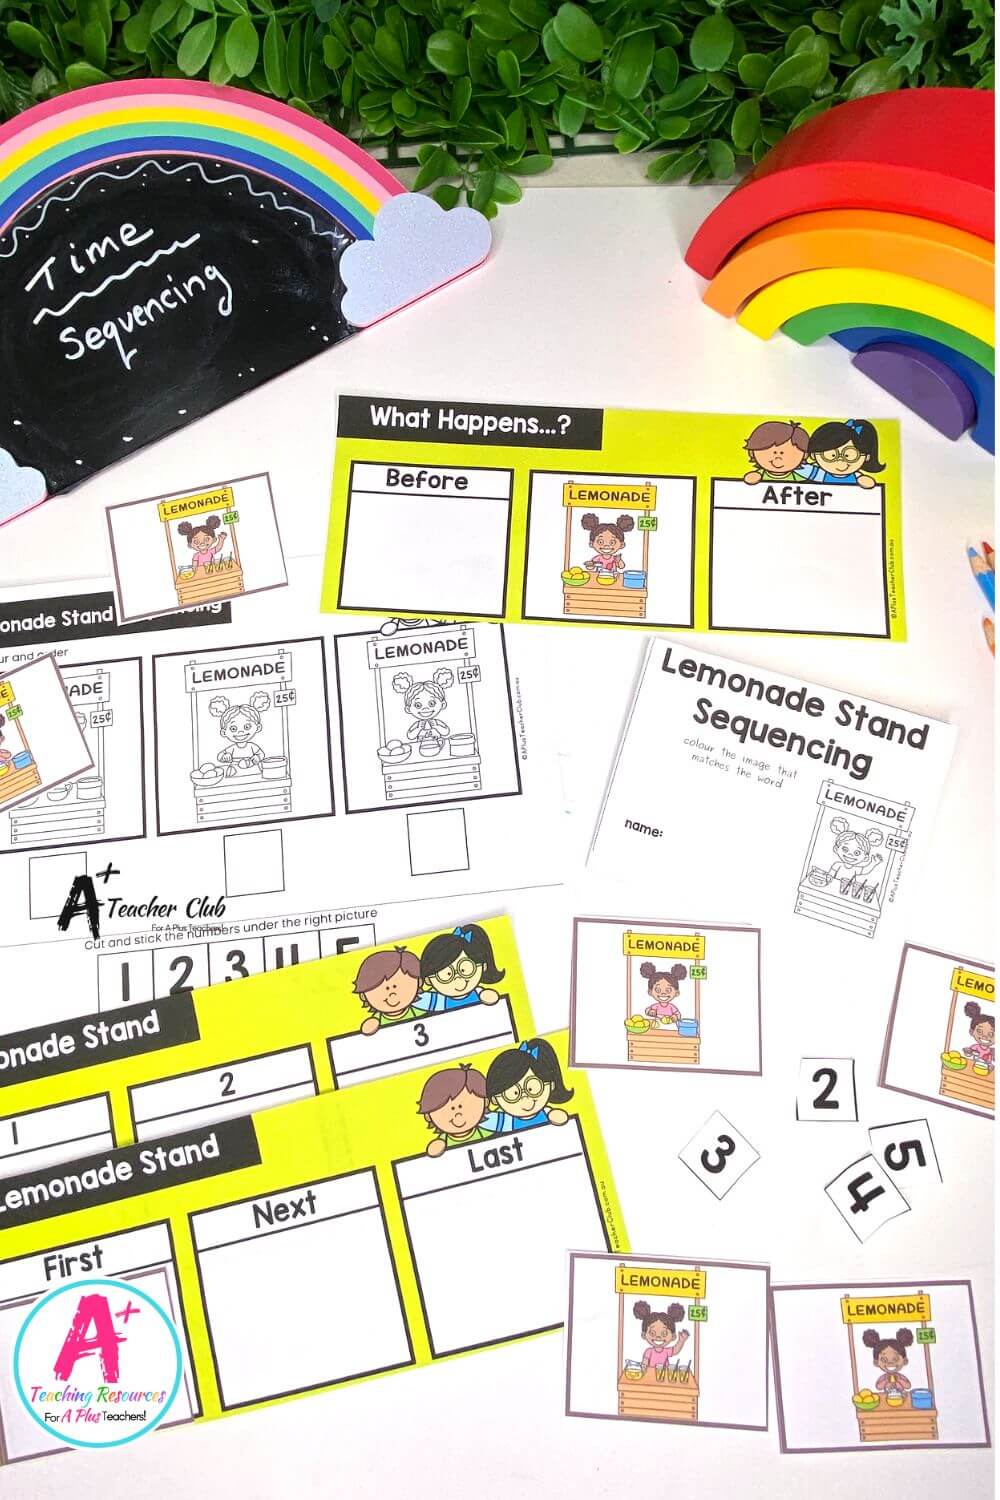 3-Step Sequencing Everyday Events - Lemonade Stand Activities Pack